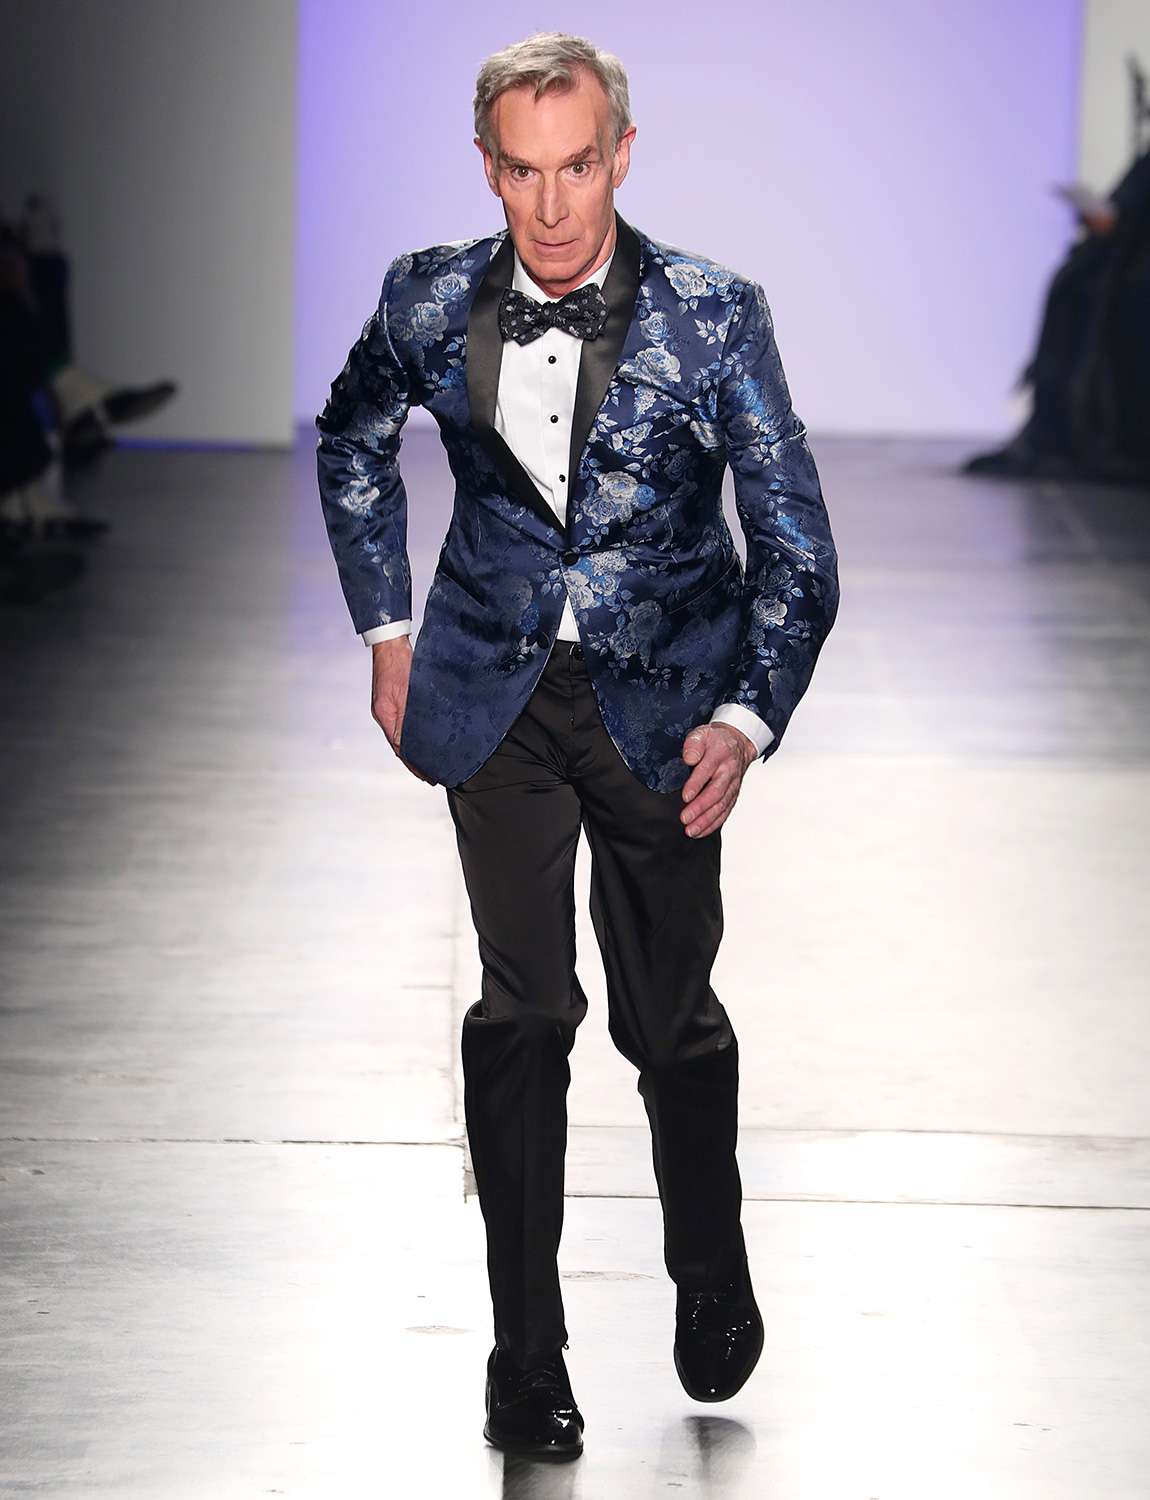 Bill Nye walks the runway at The Blue Jacket Fashion Show during NYFW at Pier 59 Studios on February 05, 2020 in New York City